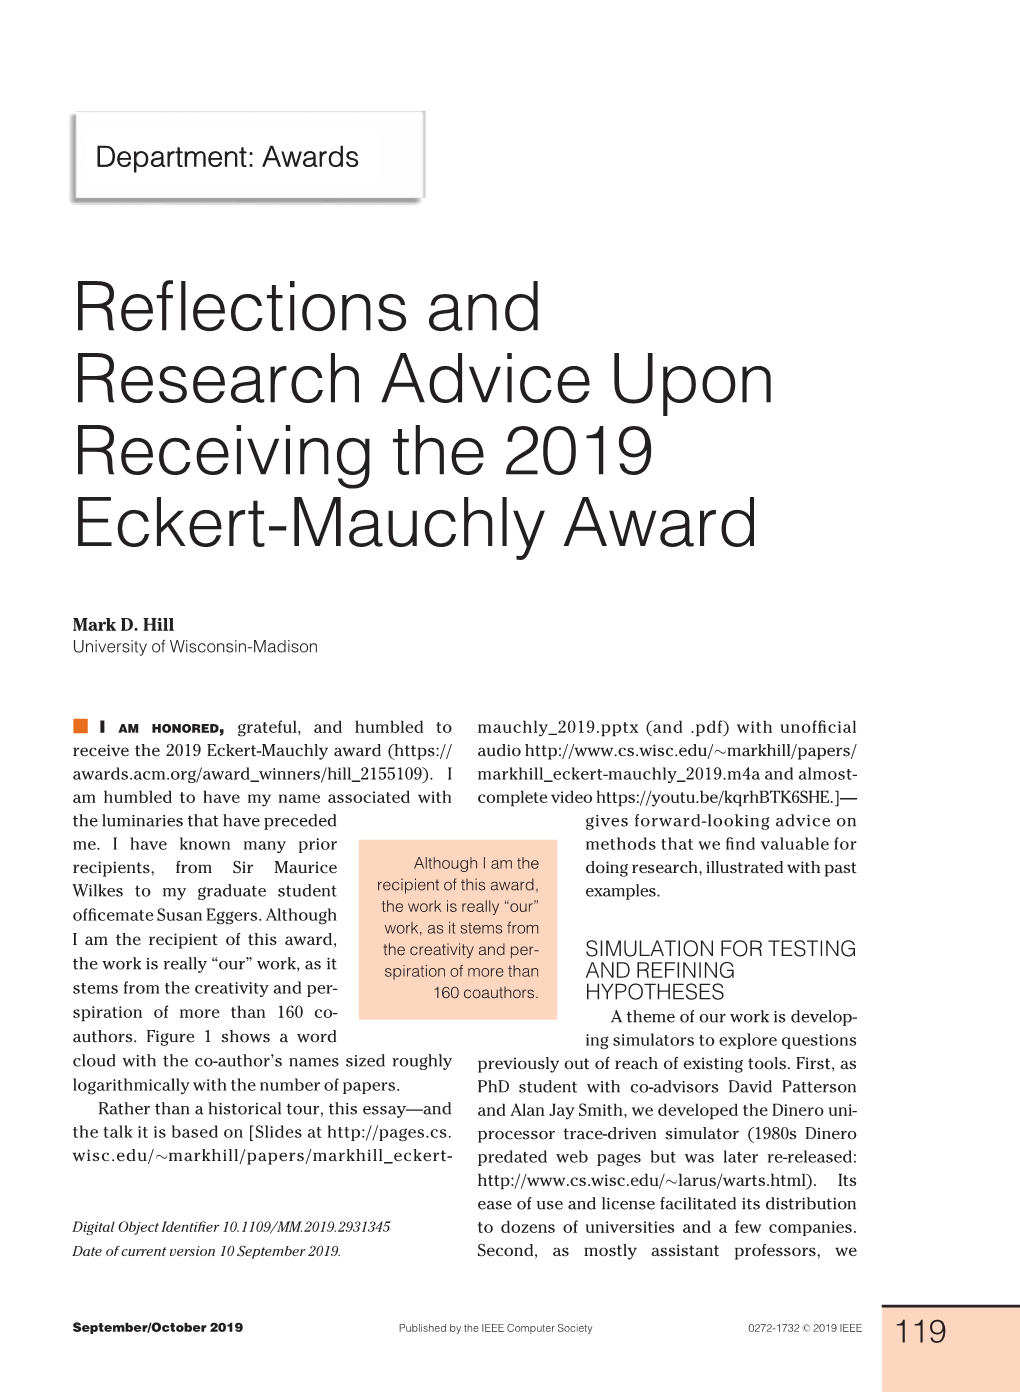 Reflections and Research Advice Upon Receiving the 2019 Eckert